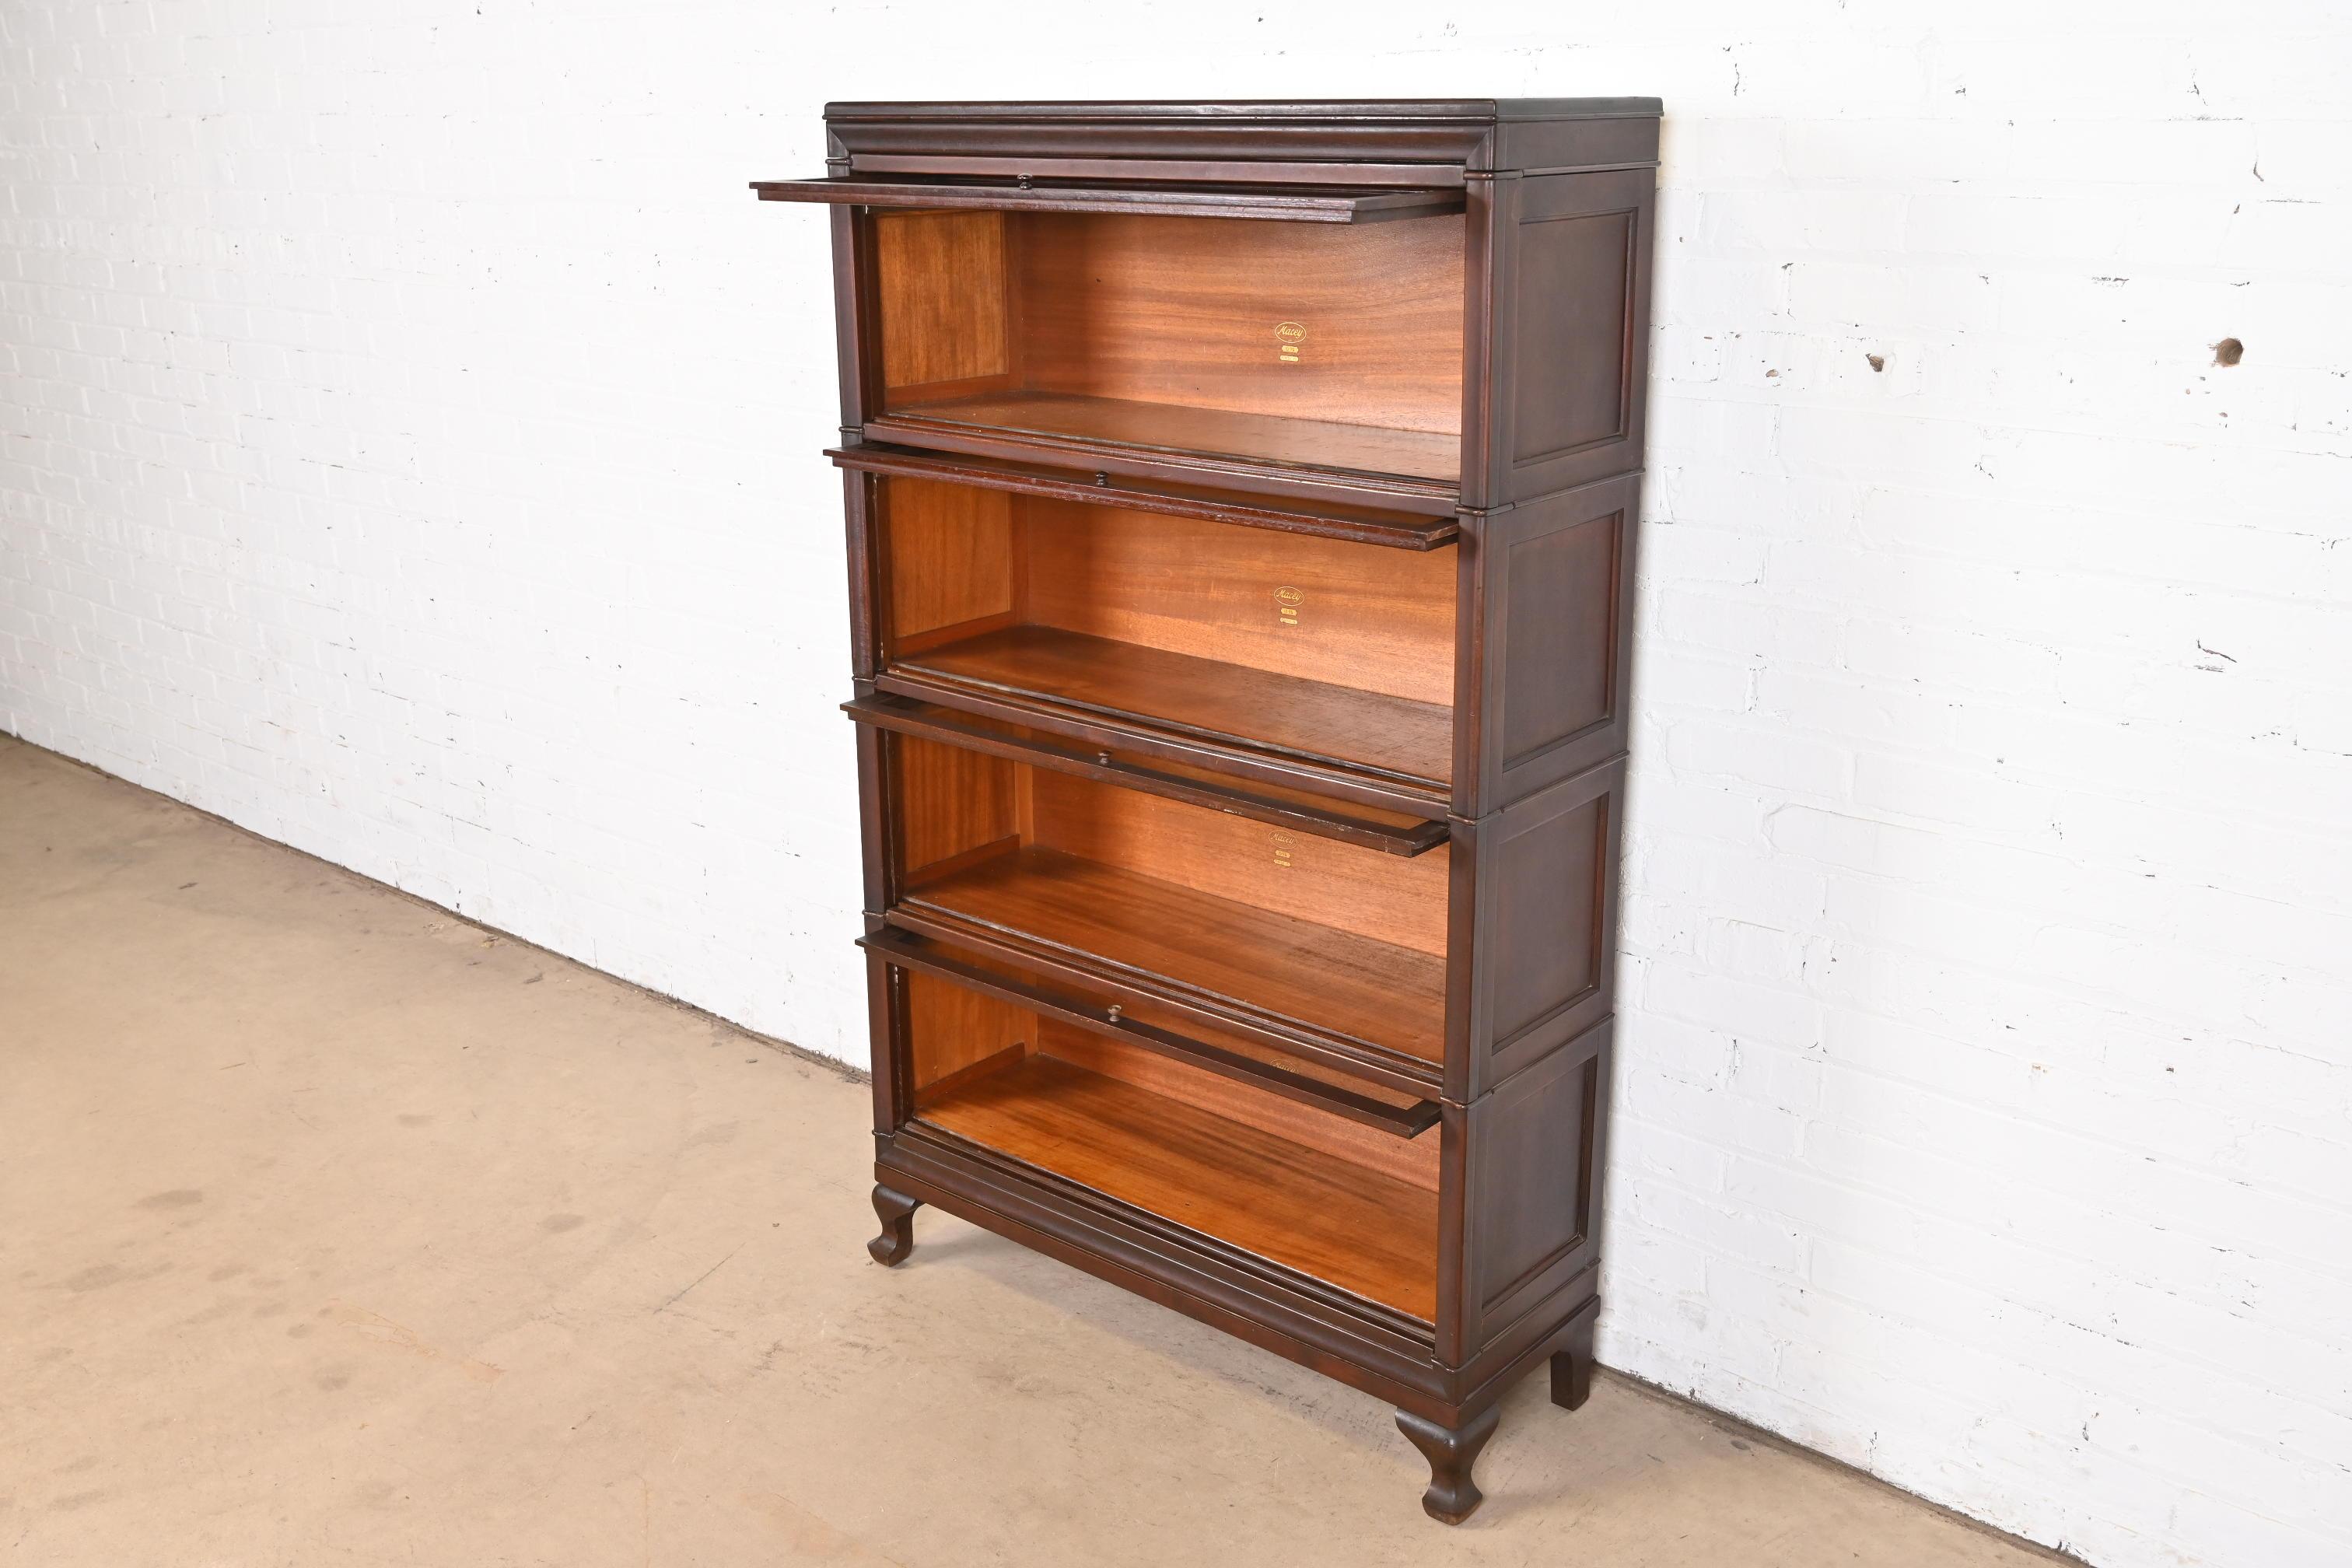 Antique Arts & Crafts Mahogany Four-Stack Barrister Bookcase by Macey, 1920s For Sale 1